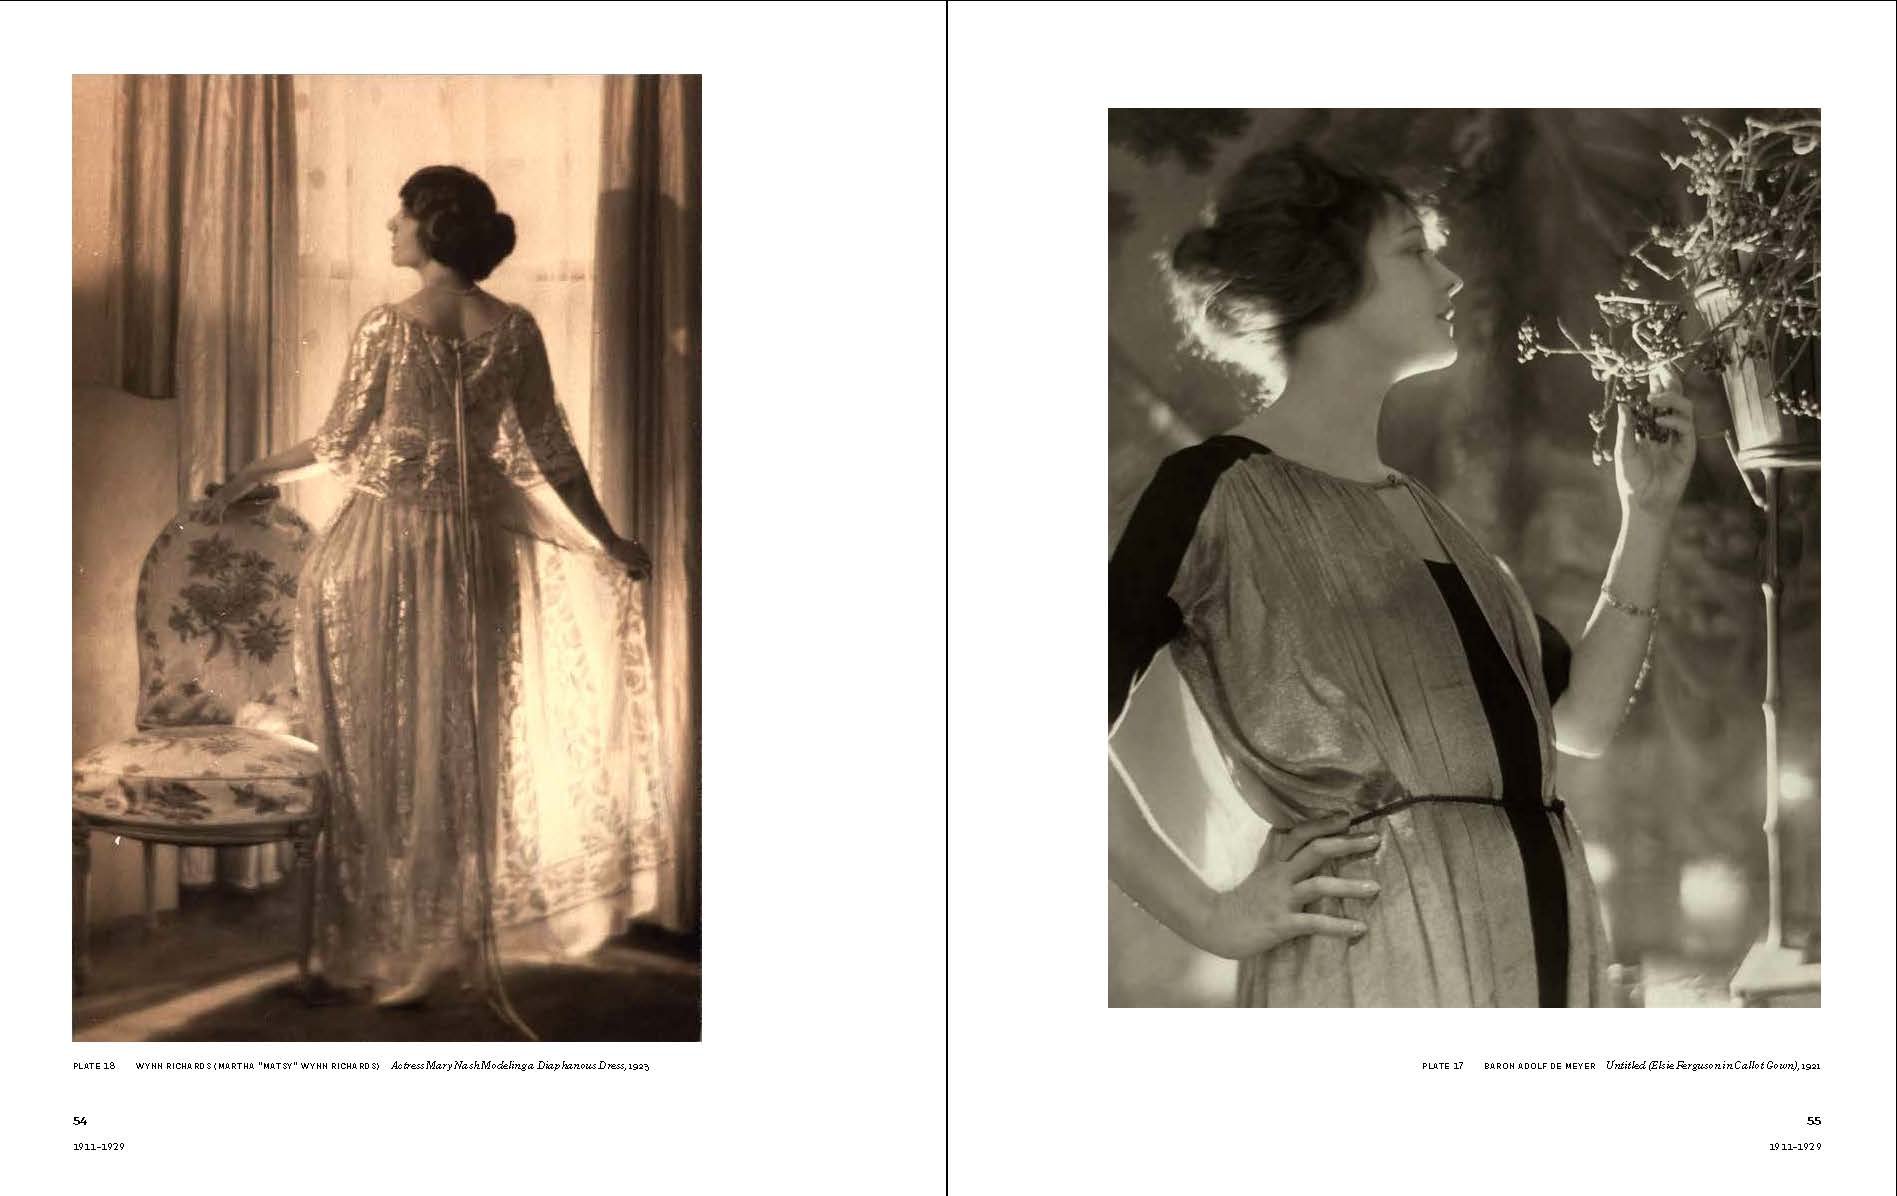 Icons of Style: A Century of Fashion Photography